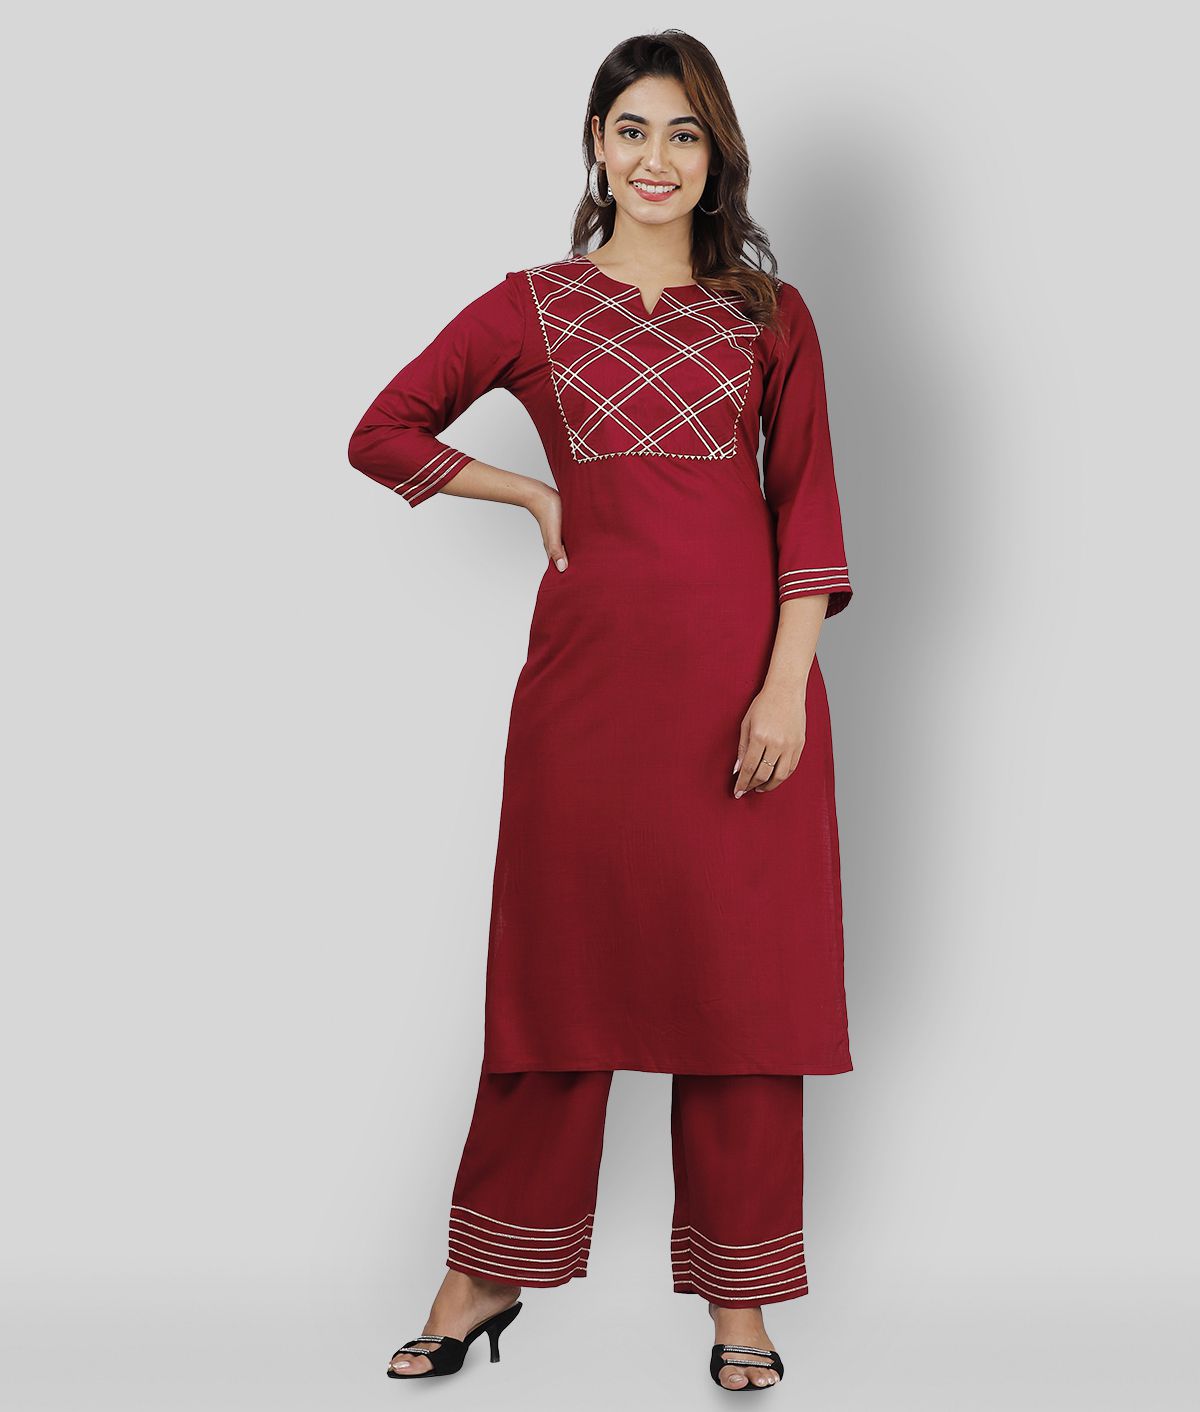     			Doriya - Maroon Straight Rayon Women's Stitched Salwar Suit ( Pack of 1 )